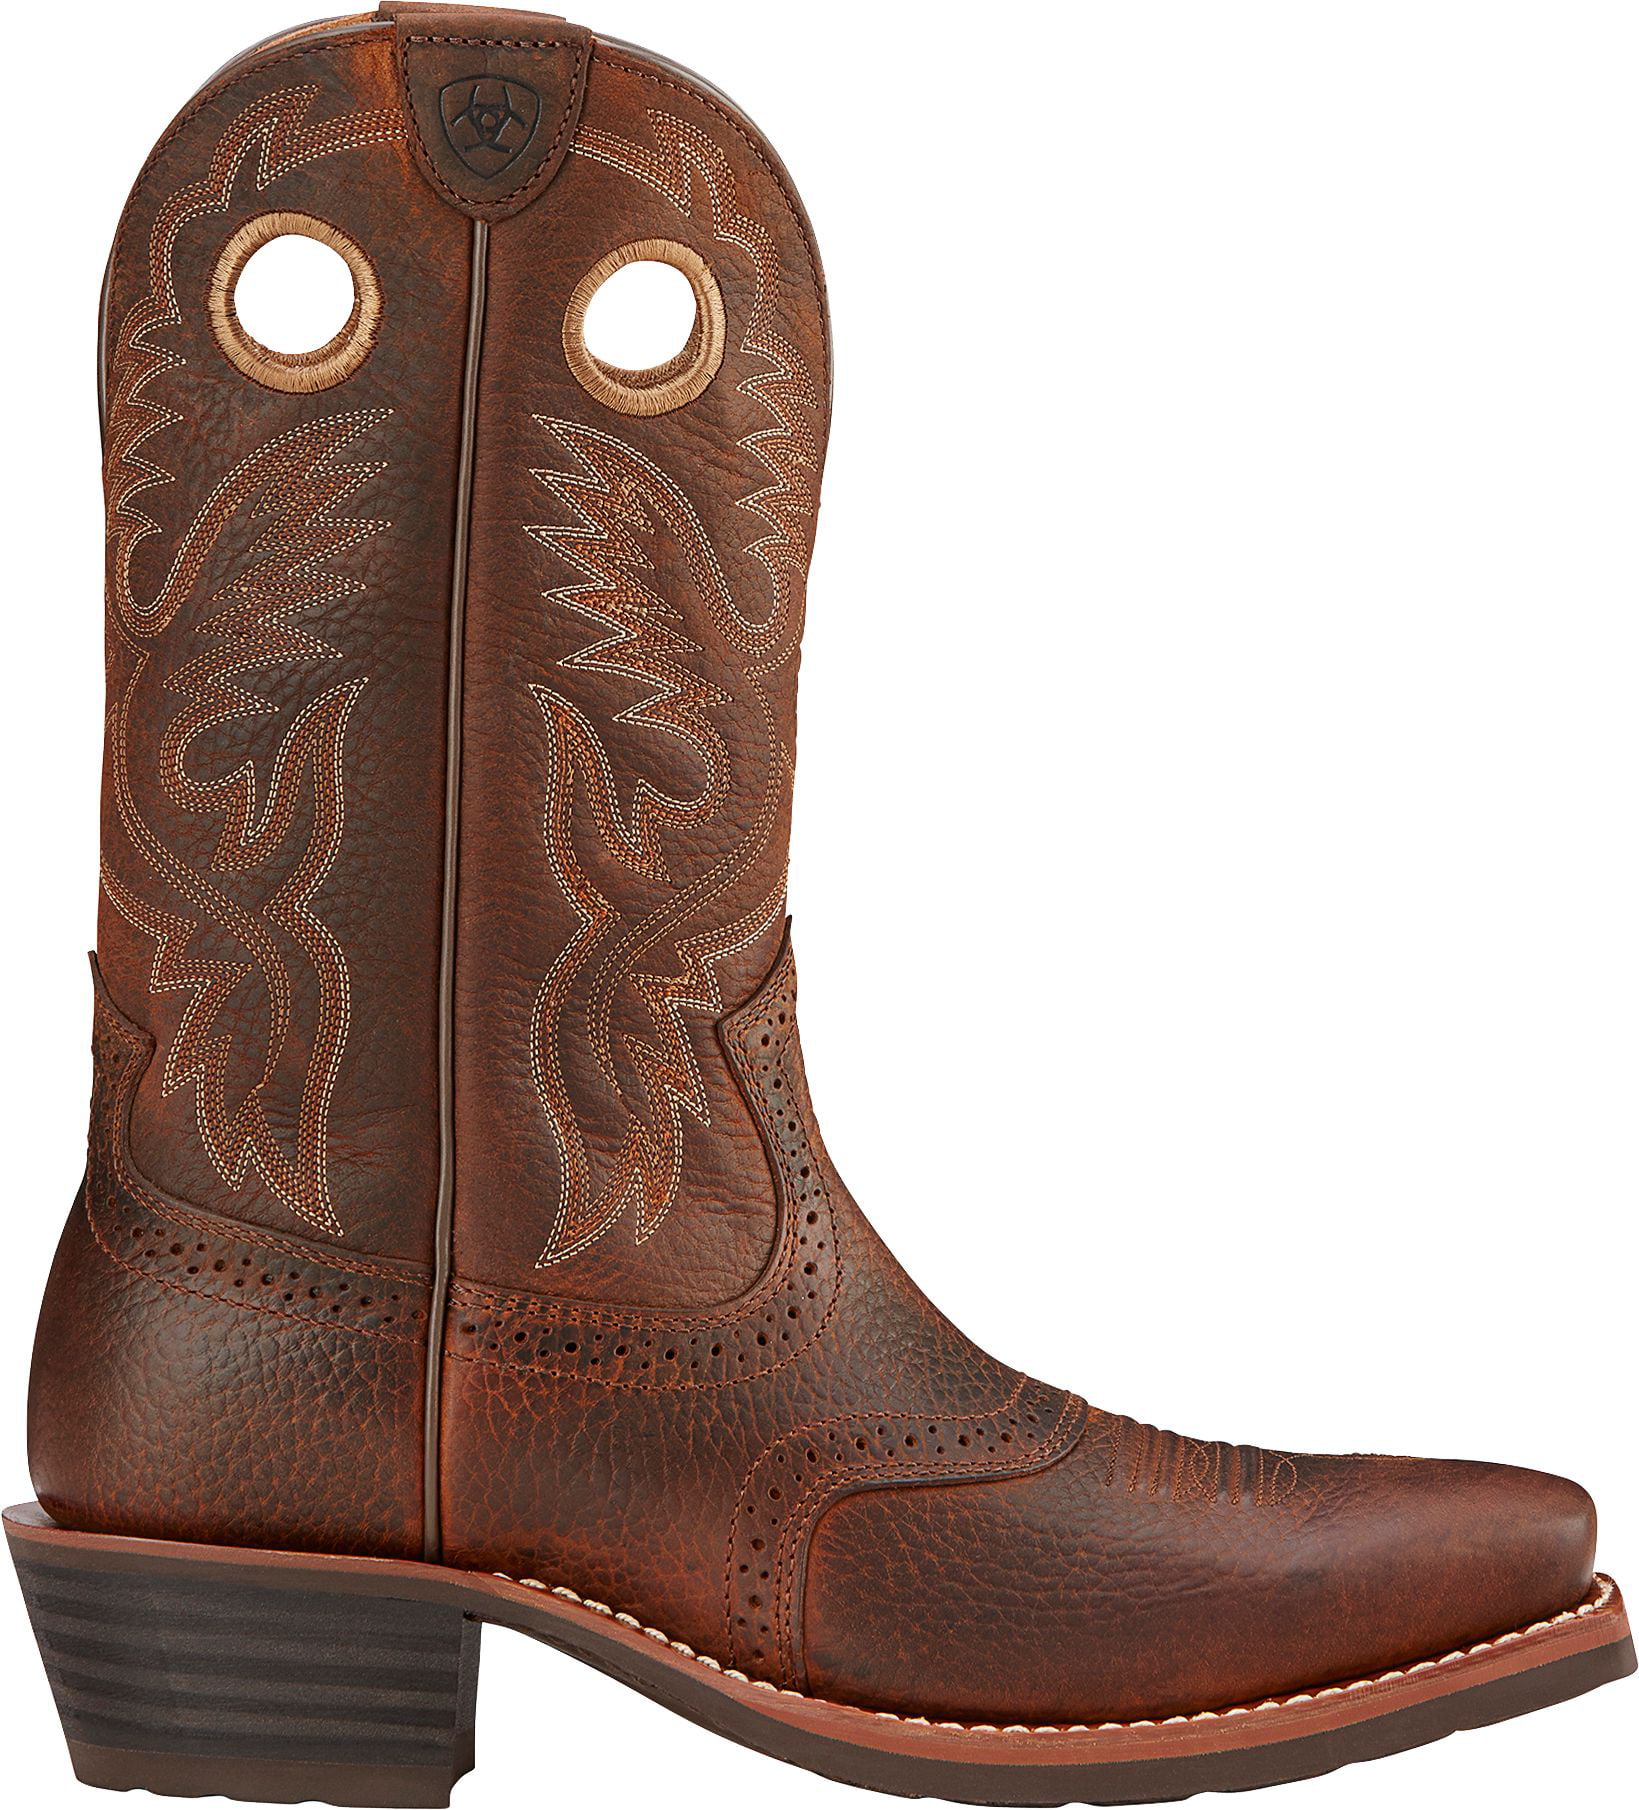 Ariat Heritage Roughstock Western Boots Kids’ Leather Country Riding Boot